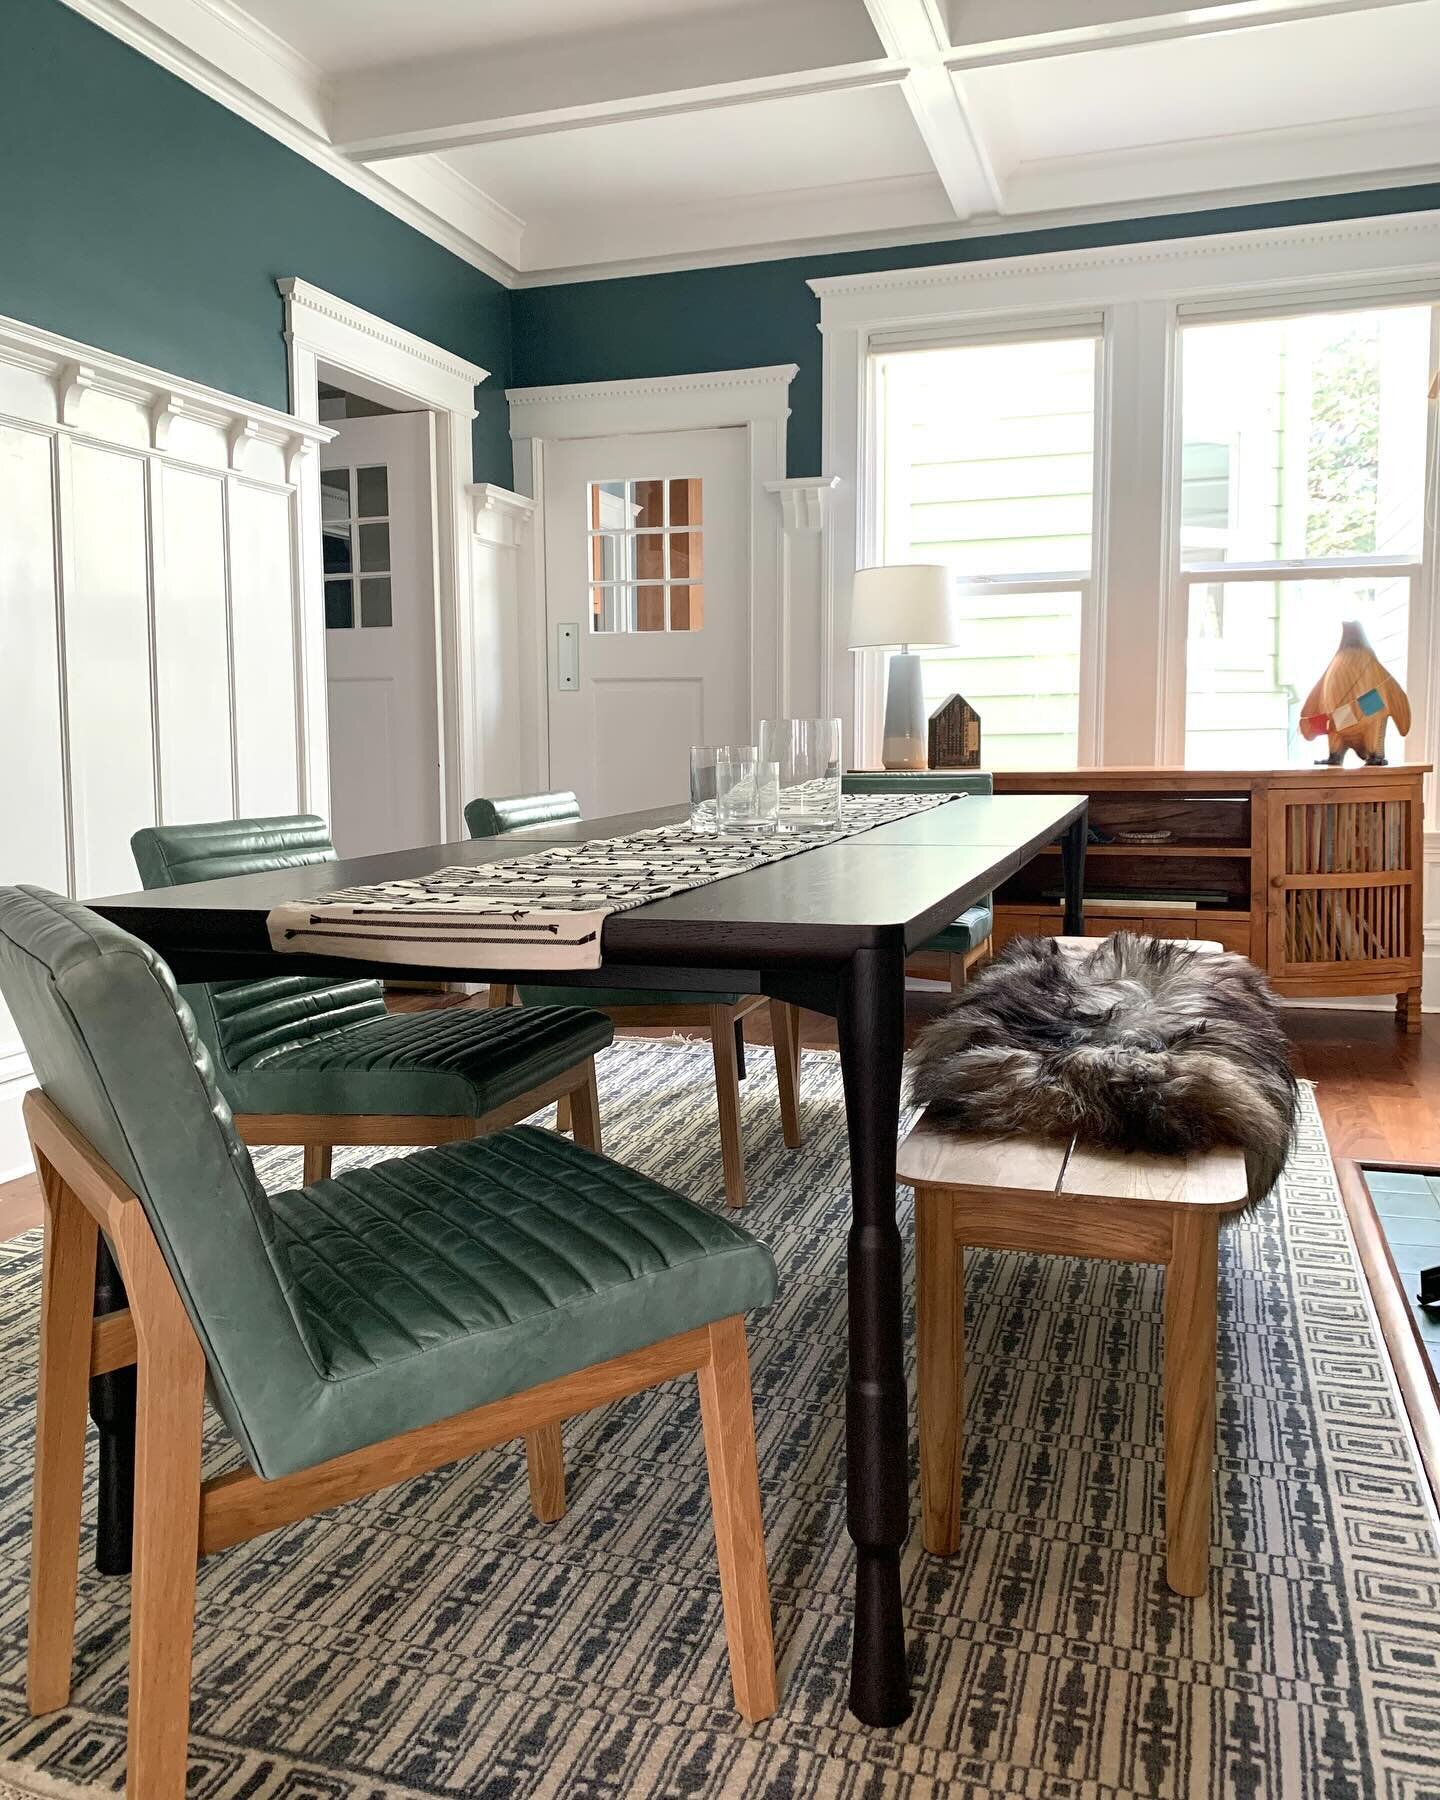 Almost dinner party ready at my WSB project! Still to come&hellip;. Custom window treatments and Chandelier.
Design by: @helloaehome #helloaehome #bayareainteriordesigner #interiordesign